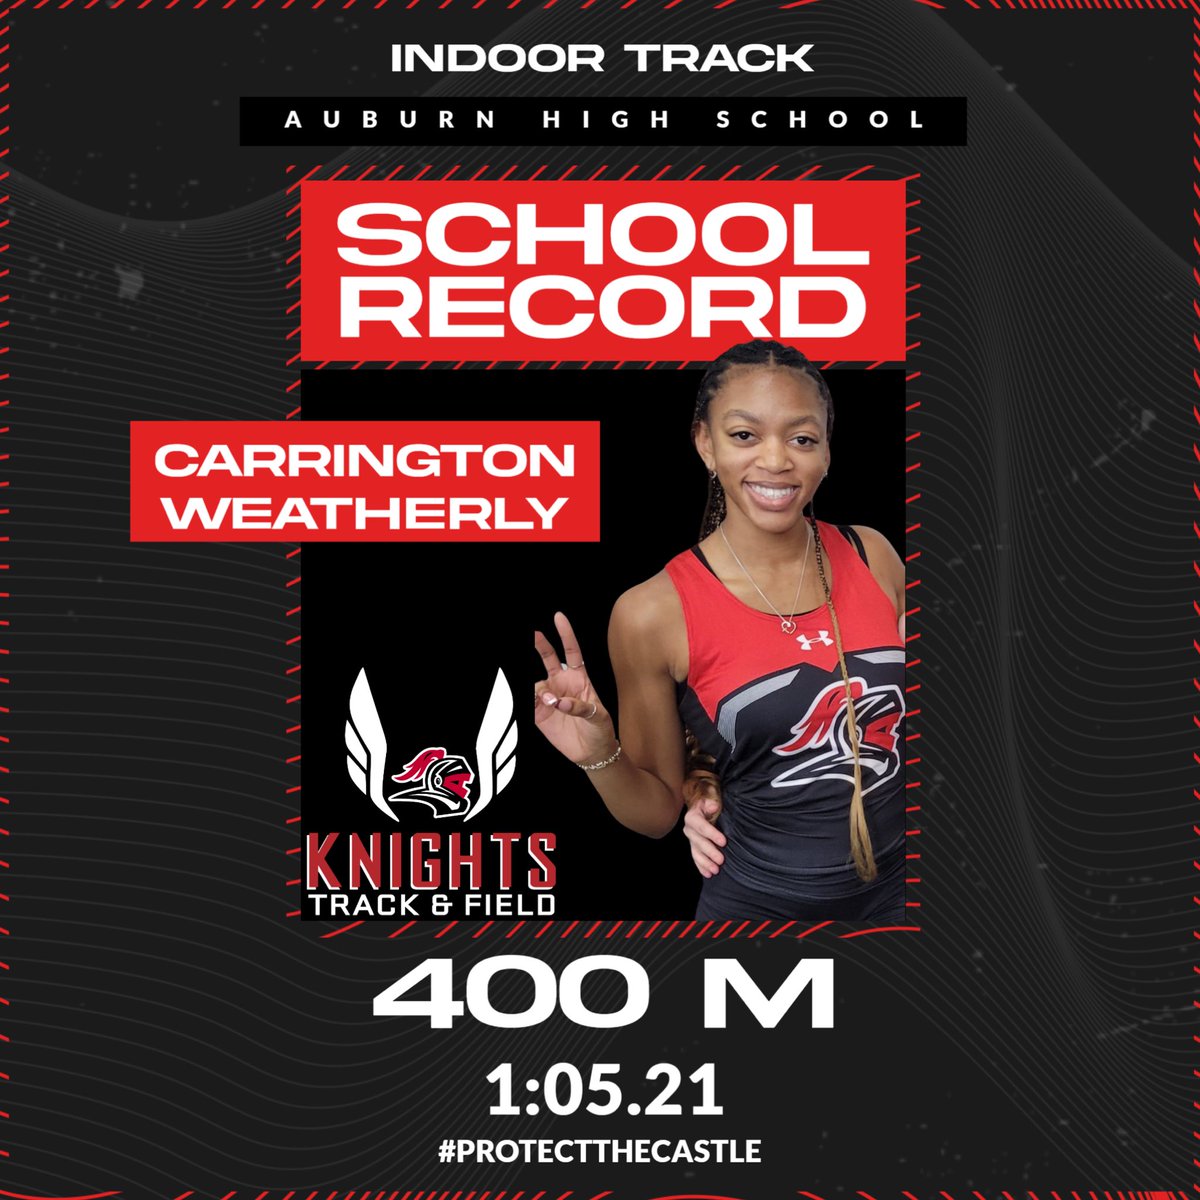 Huge CONGRATULATIONS to our very own Carrington Weatherly for SHATTERING the school’s indoor 400 record with a blistering time of 1:05.21!! Great run Carrington and we look forward to watching you on the track this season!